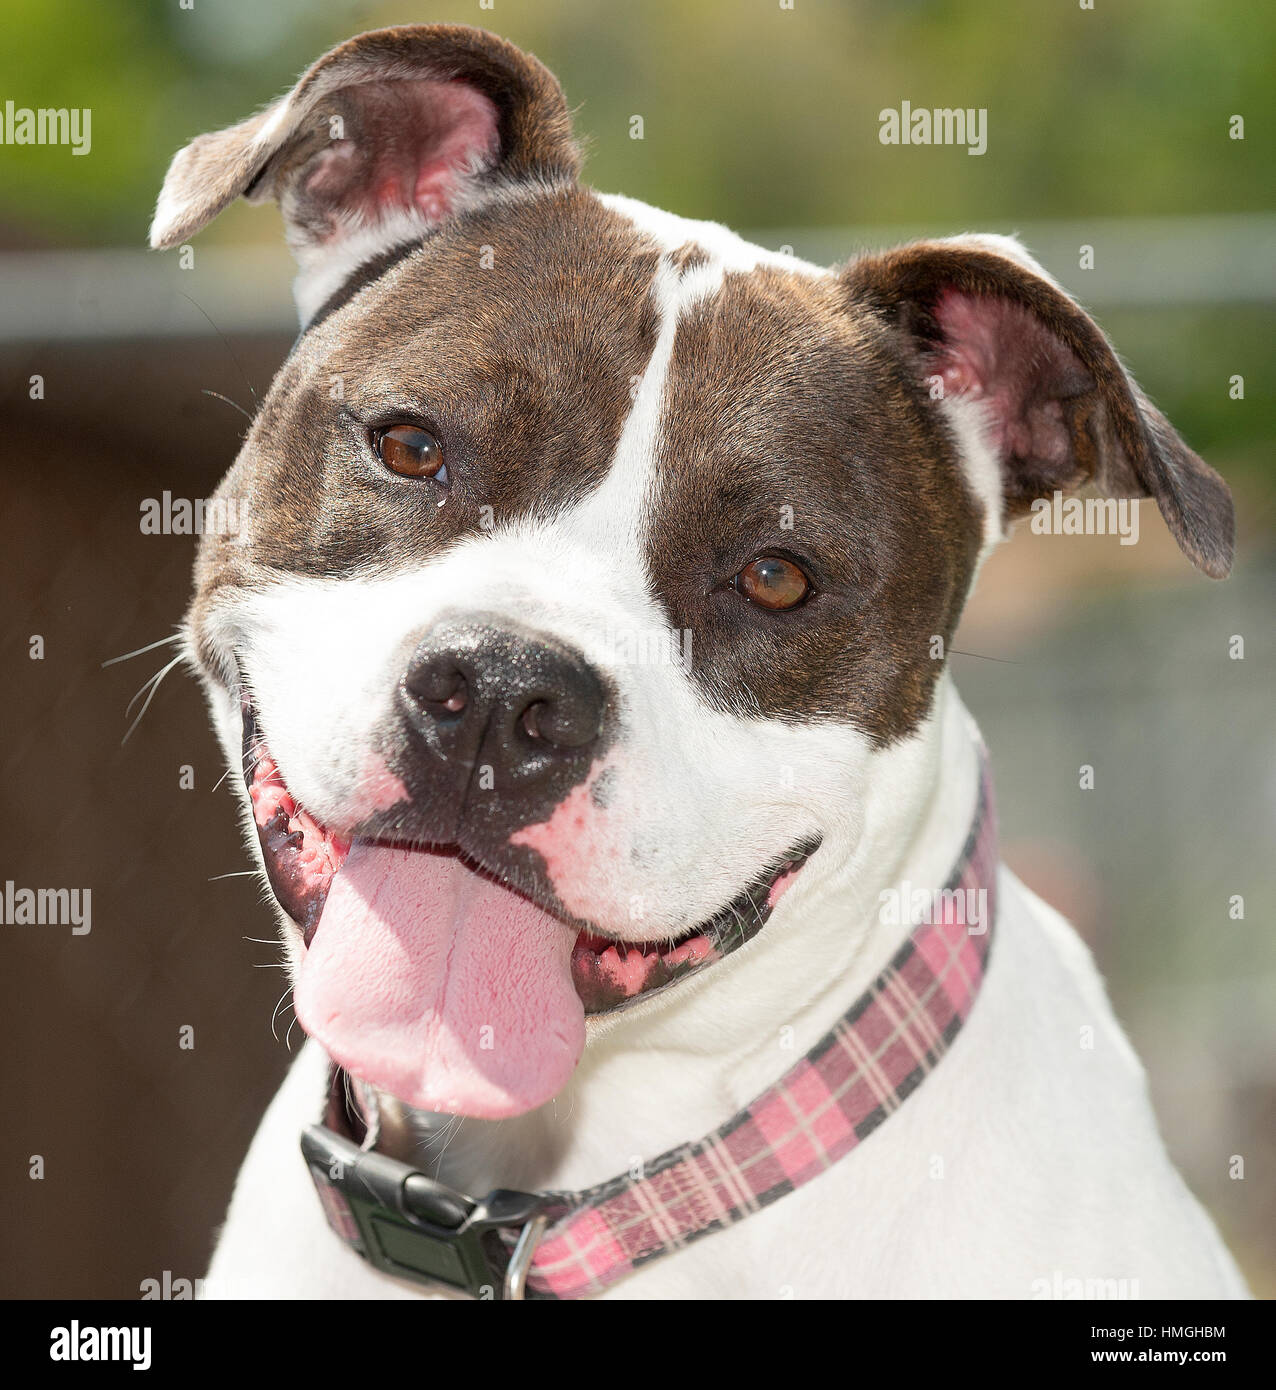 Brown and white pitbull mix headshot looking at camera close up head tilt tongue out smiling pink collar Stock Photo